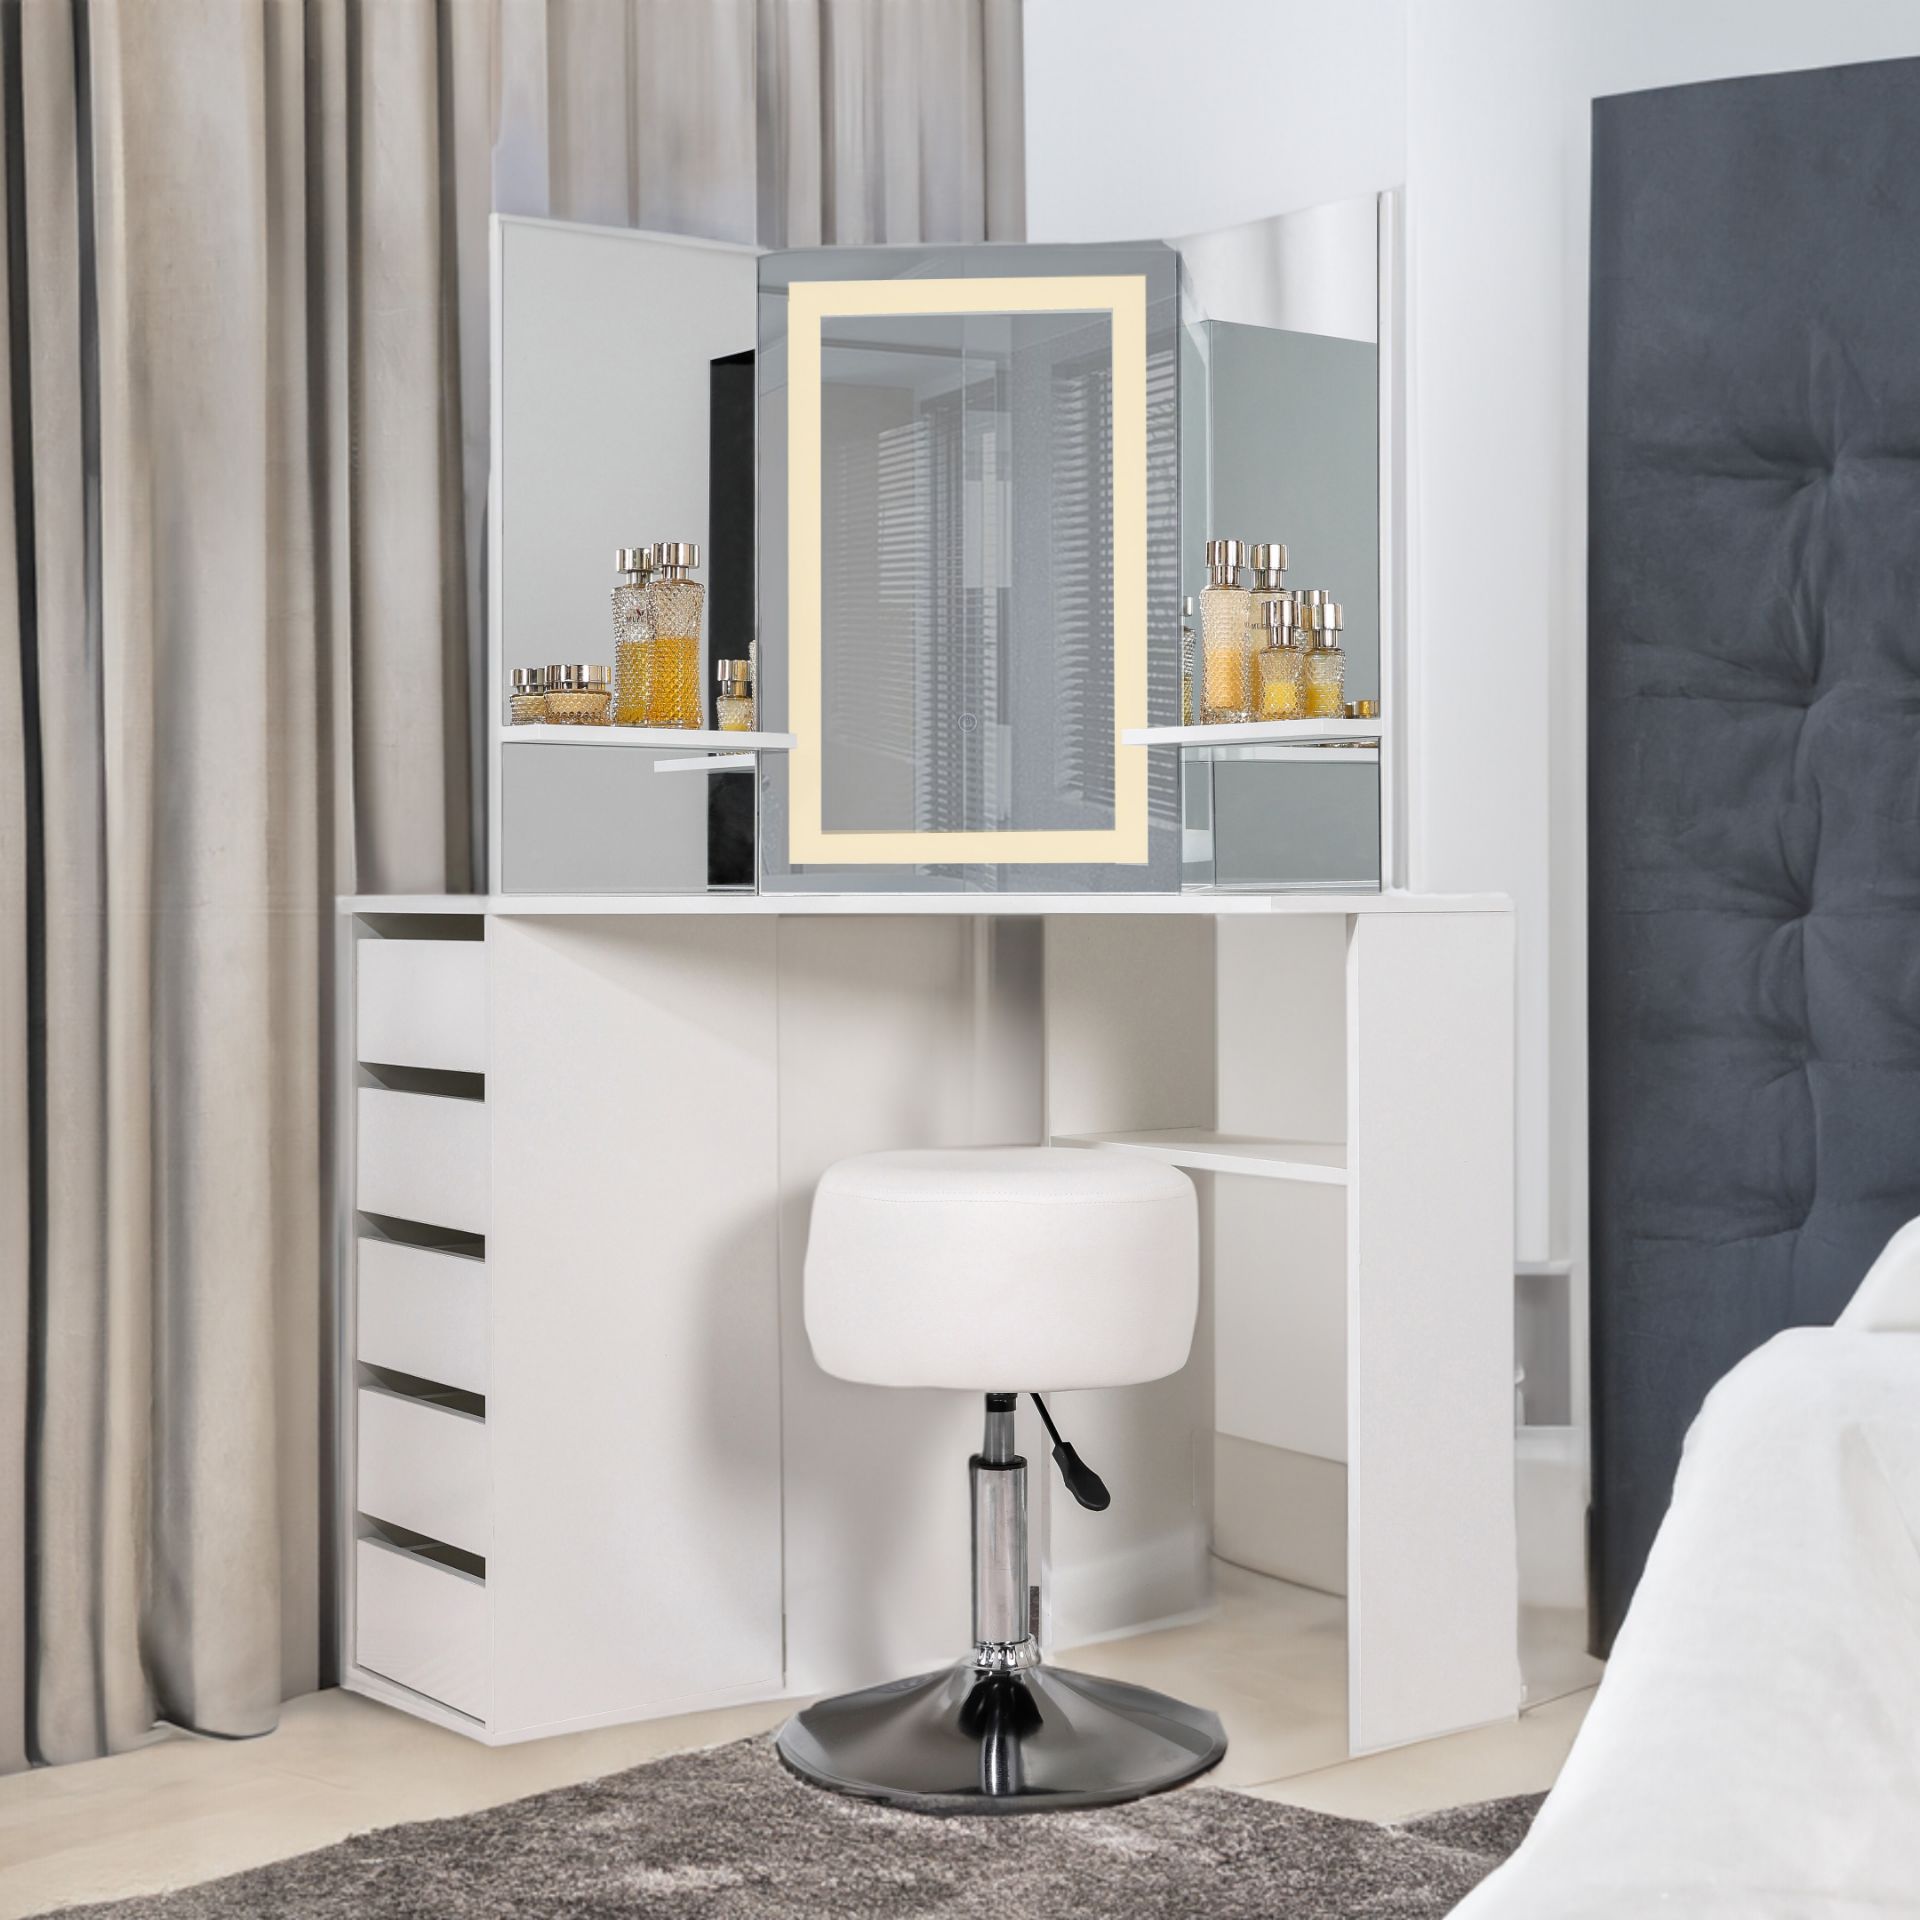 WHITE 5 DRAWER MAKE UP CORNER DRESSING TABLE WITH TOUCH LED MIRROR AND STOOL - WHITE RRP £349.99 - - Image 3 of 4